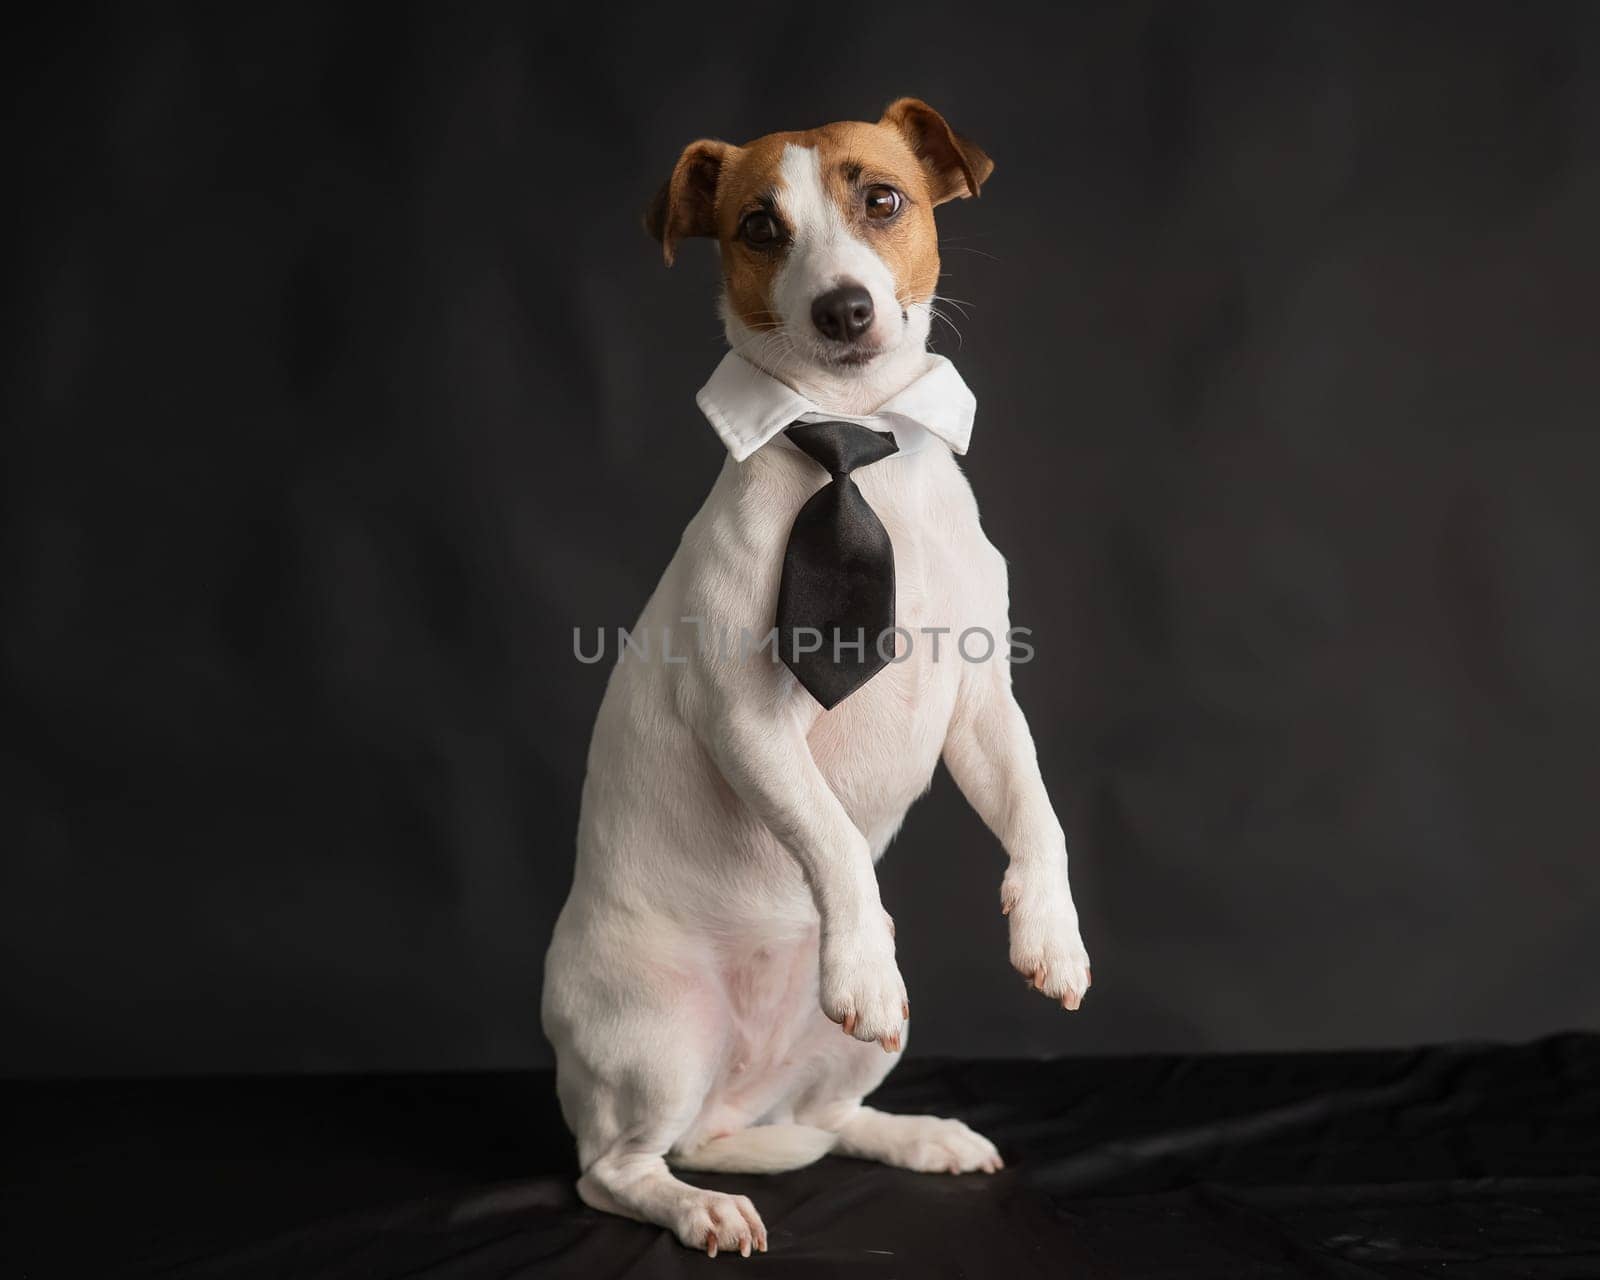 Jack Russell Terrier dog in a tie on a black background. Copy space